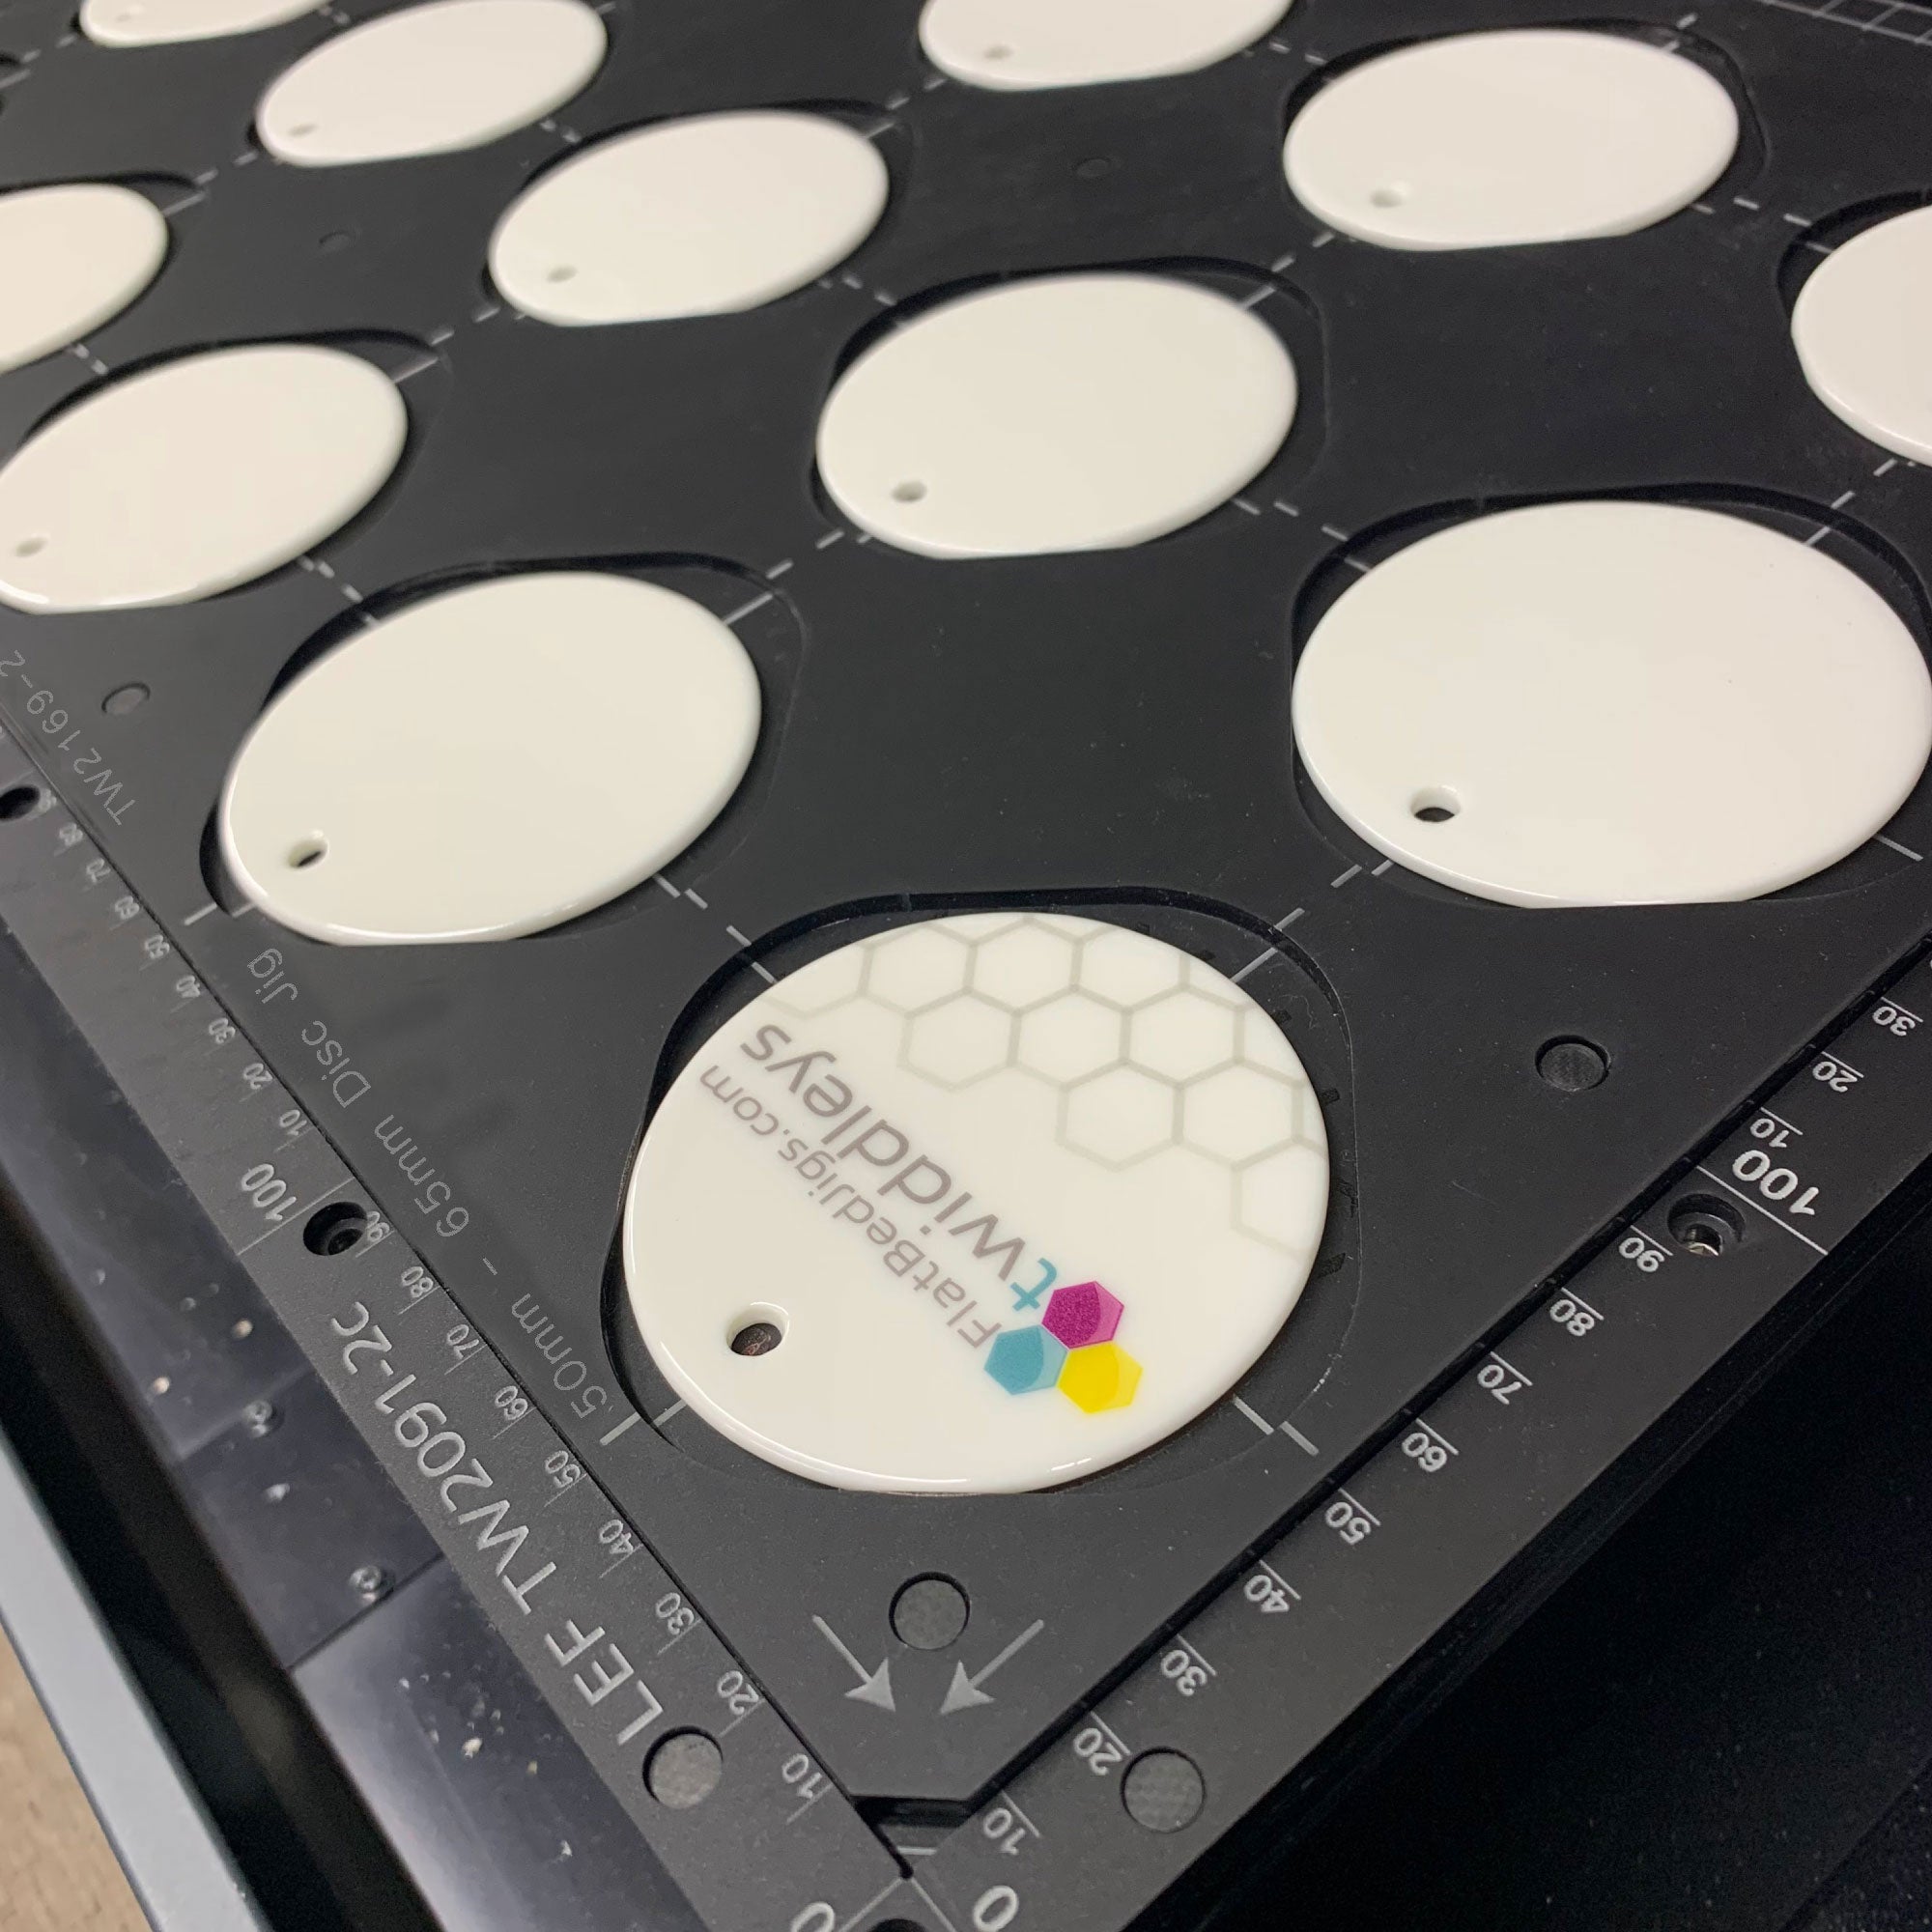 Ceramic Christmas Bauble Printing Jig for Roland LEF 200 / SF 20 Flatbed Printer Series - 50mm - 65mm Circular Discs (xx Spaces)